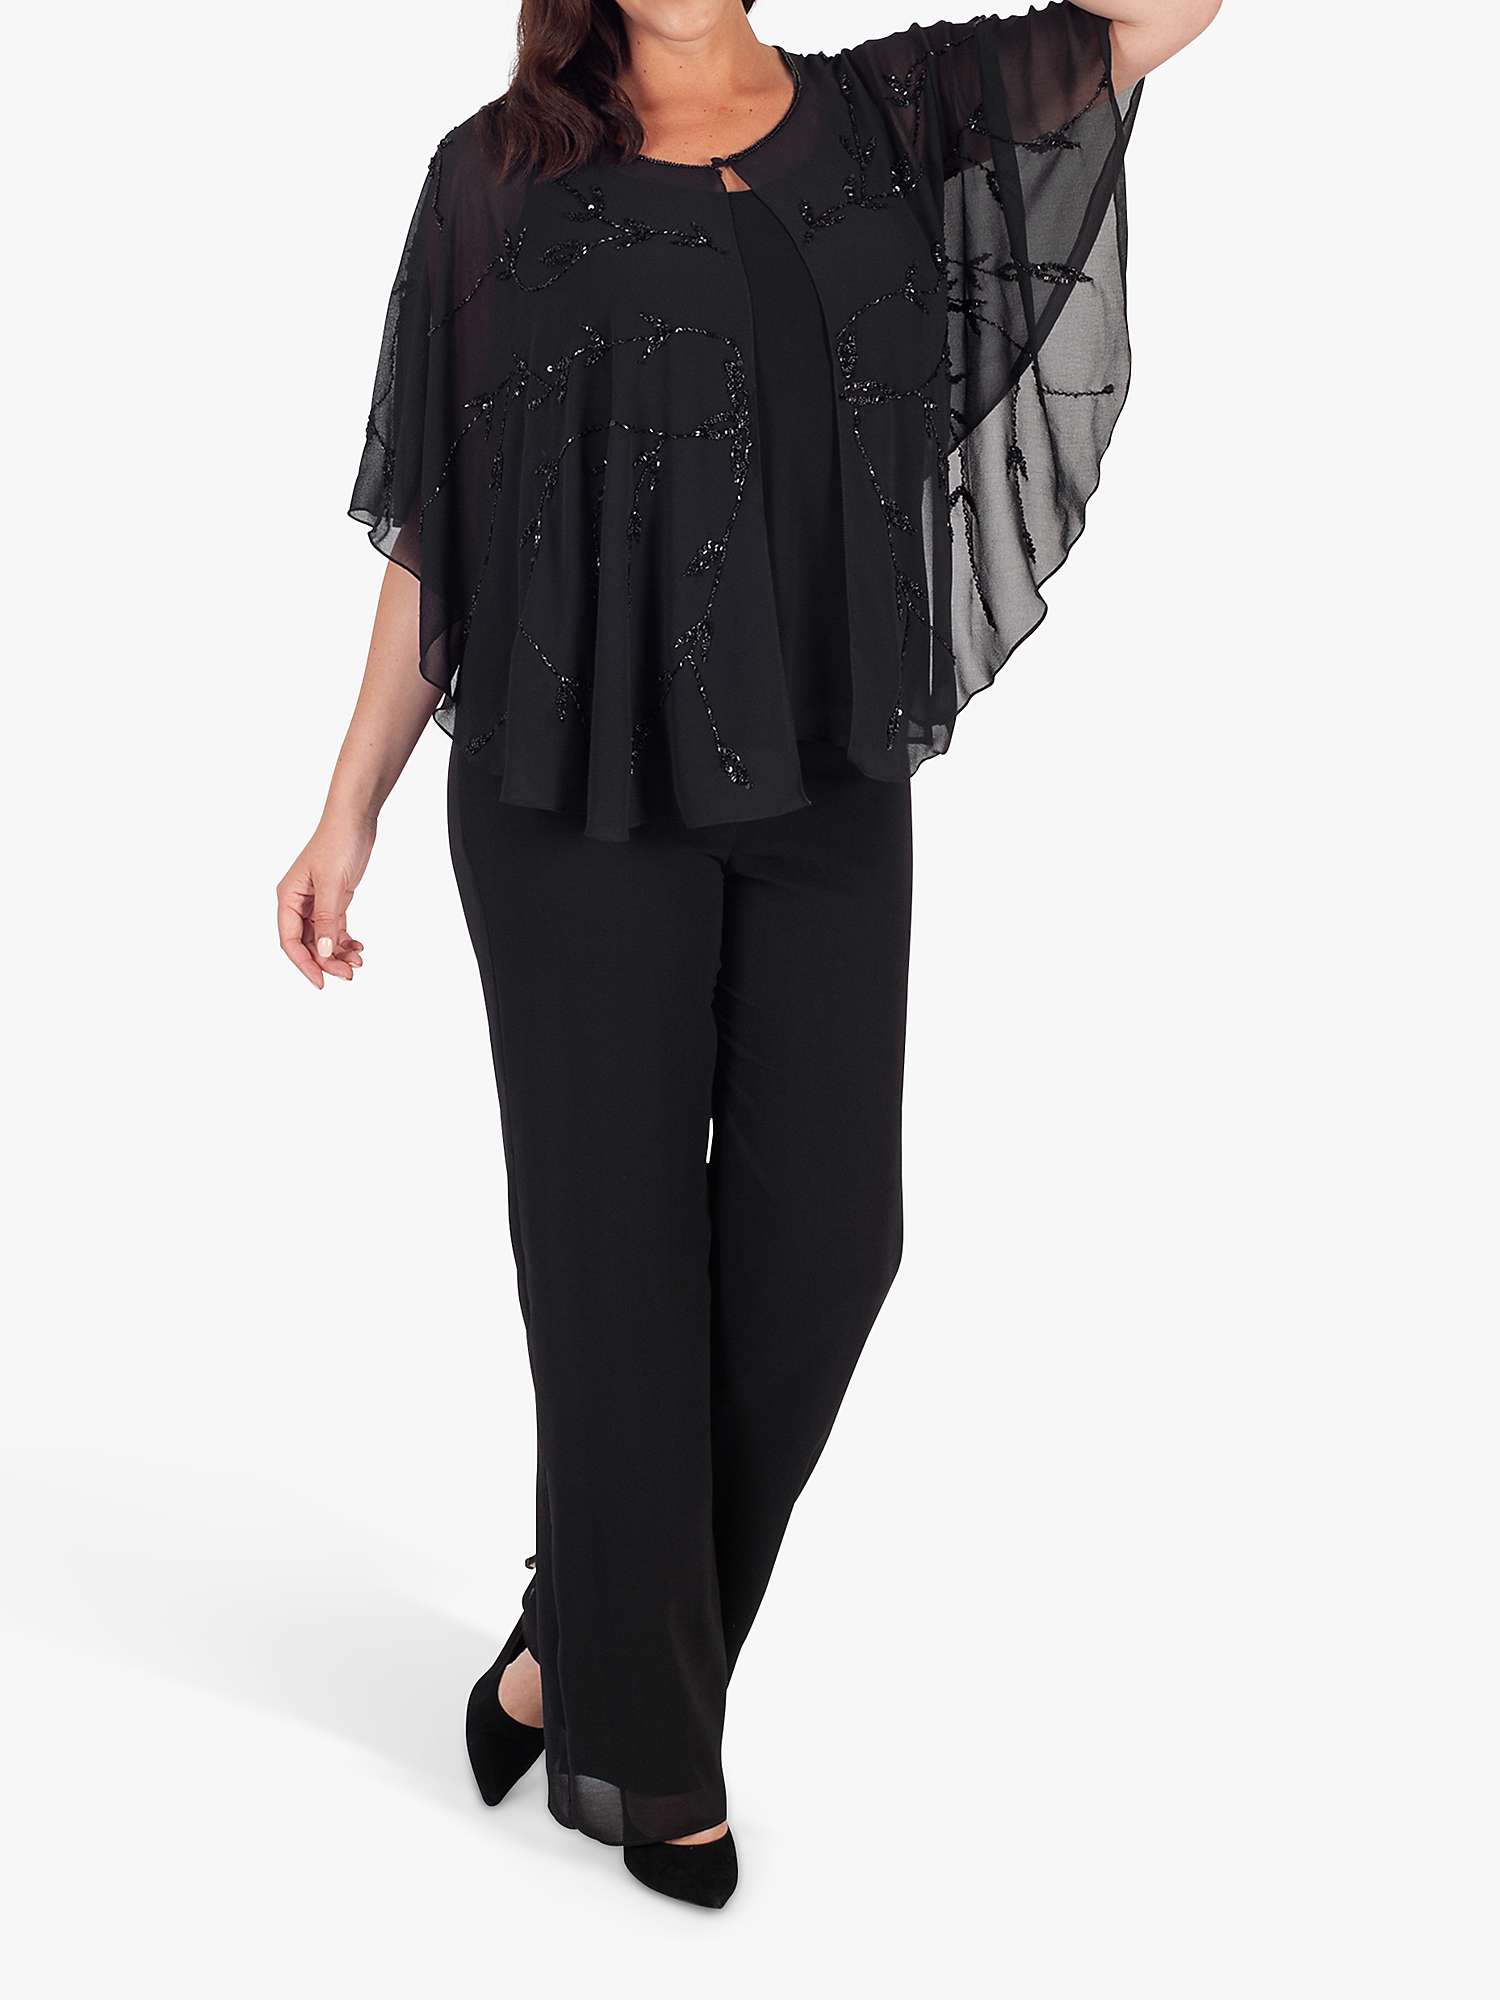 Buy Chesca Beaded Cape Online at johnlewis.com